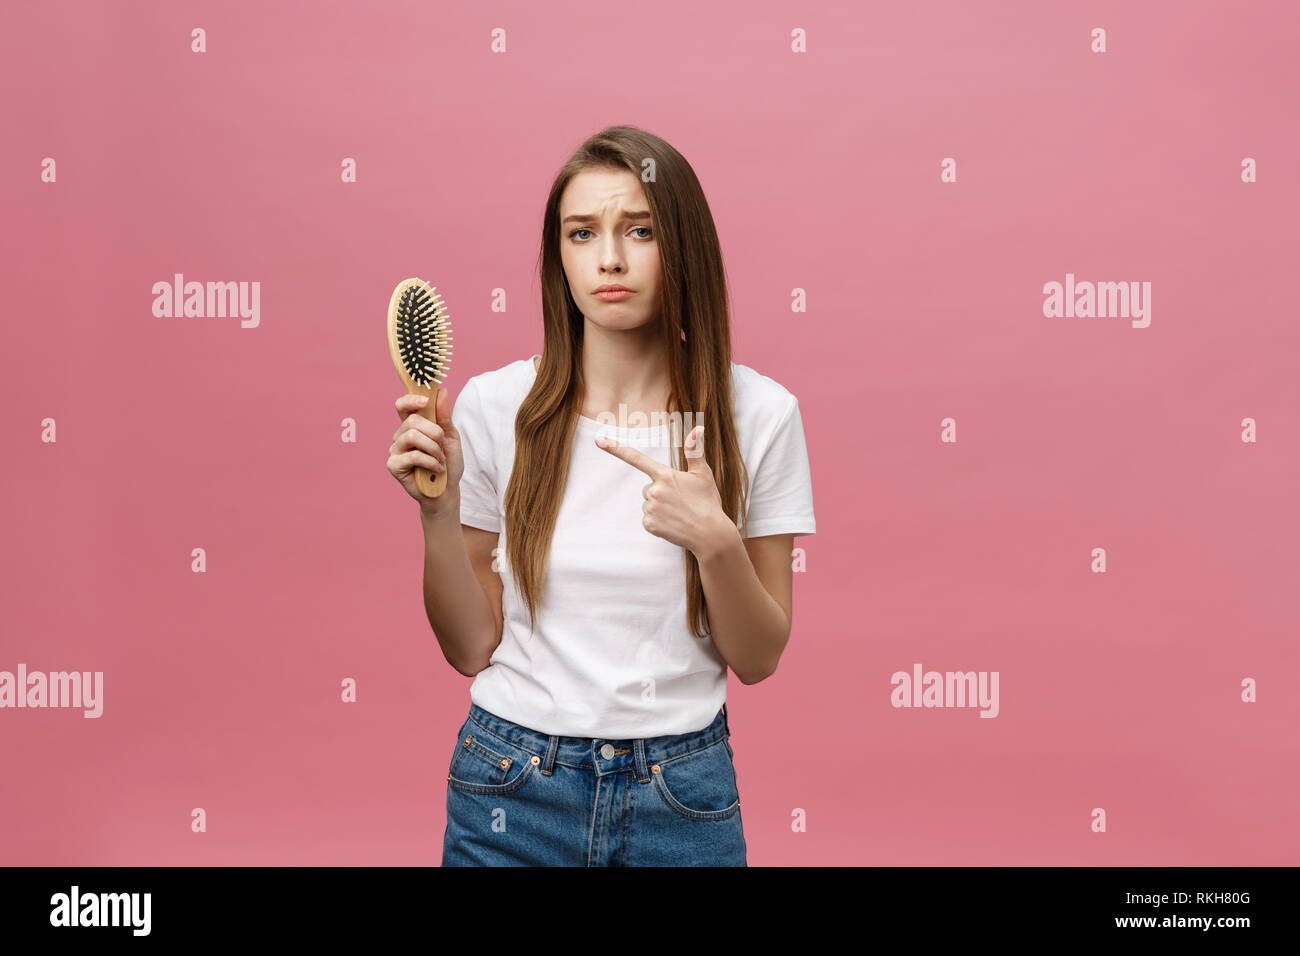 girl on a pink background with a comb for the hair, the hair problem Stock Photo